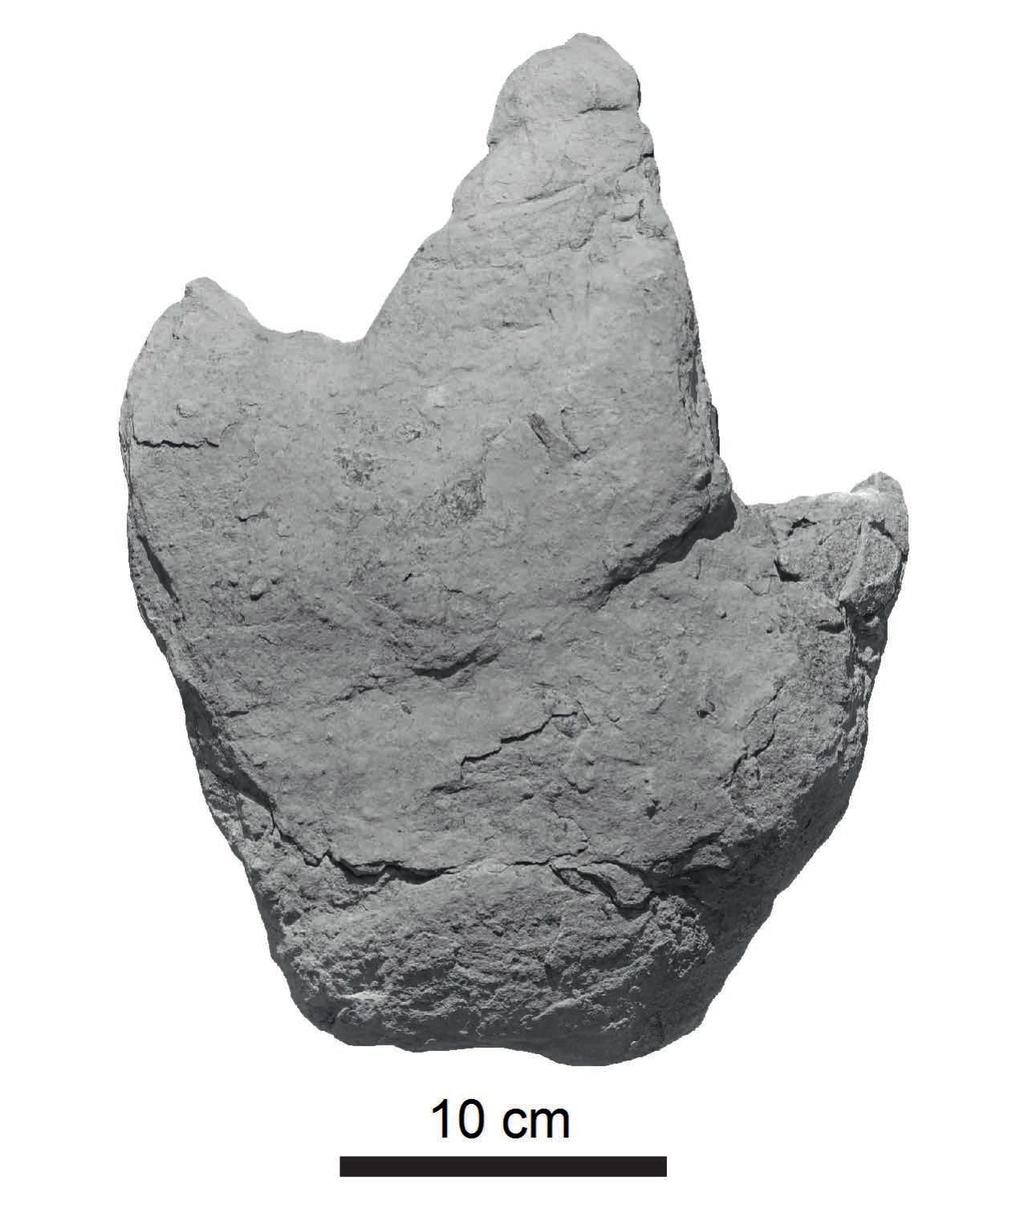 S. Figueiredo et alii - Possible ornithopod footprint from Cabo Espichel (Lower Cretaceous, Portugal) 221 the morphology of the cast and its proportions.